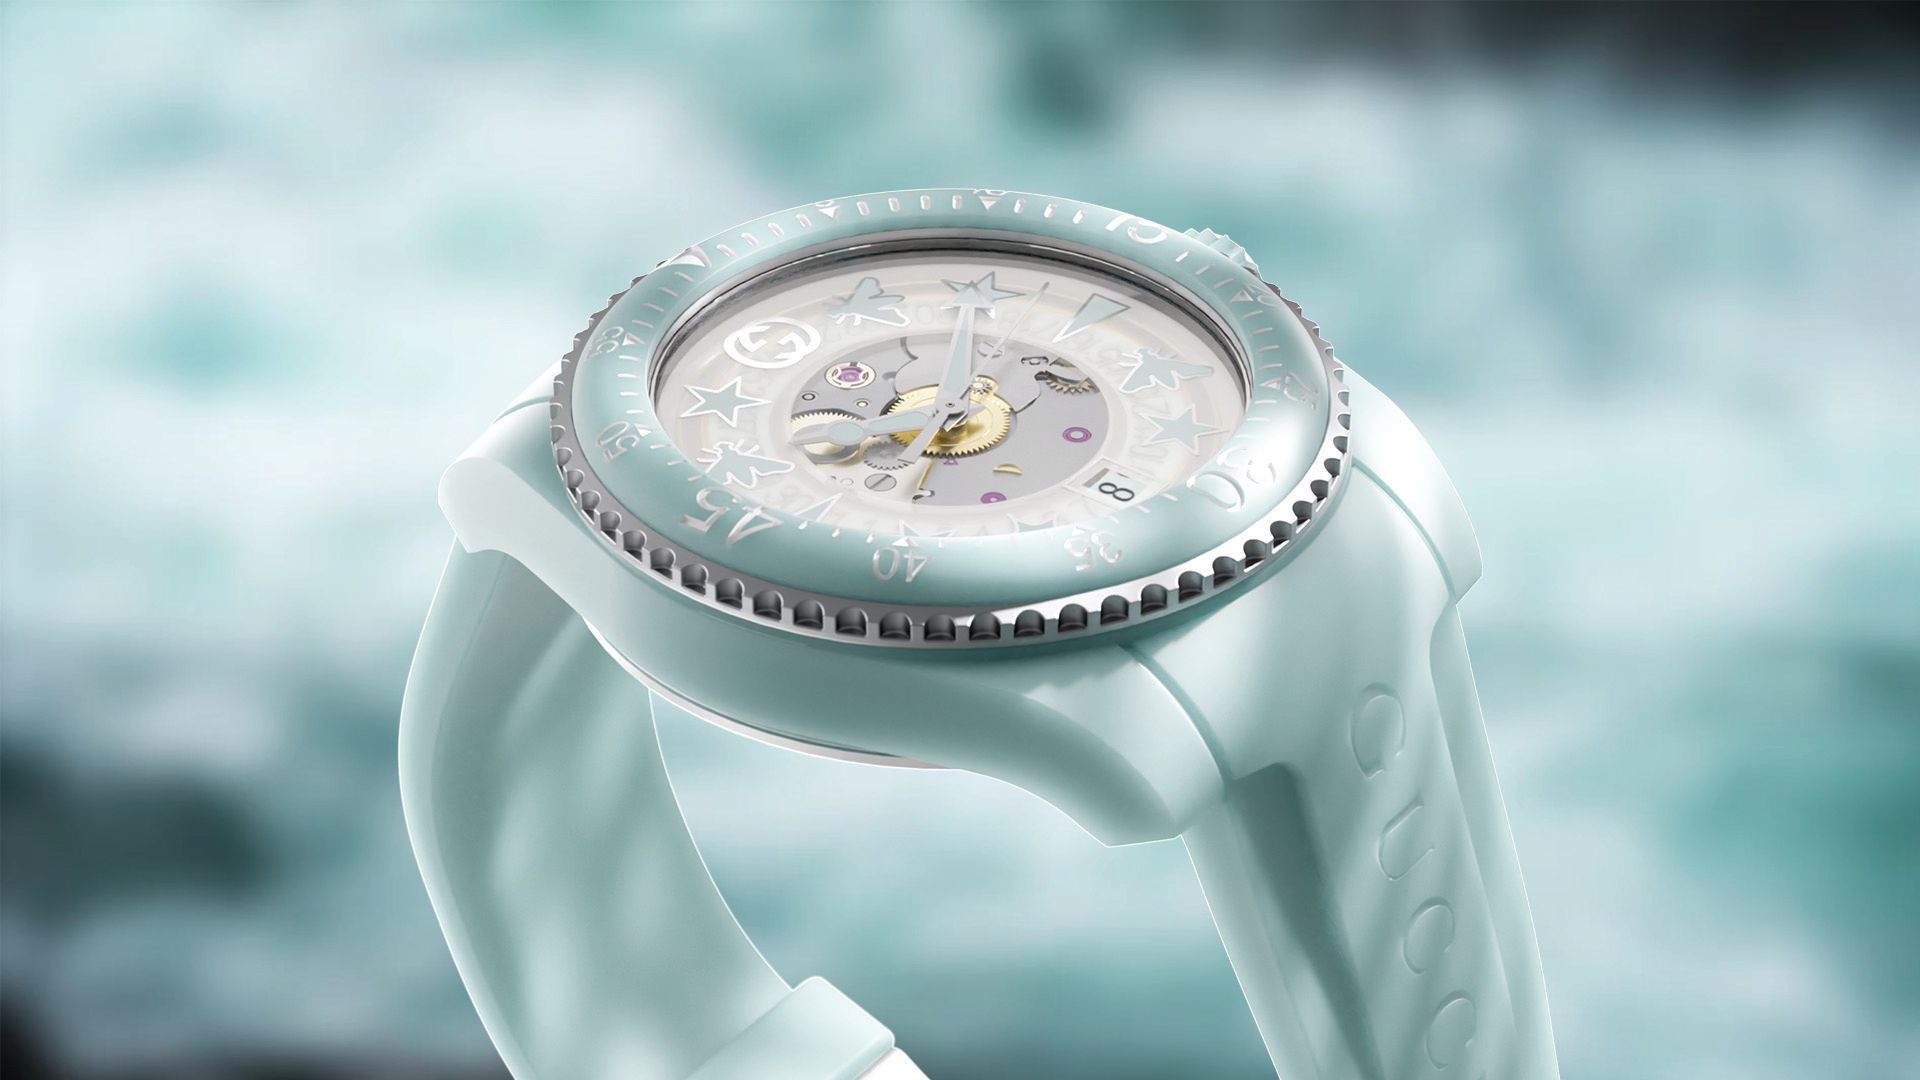 The new Gucci Dive watches are made from bio-based materials. 